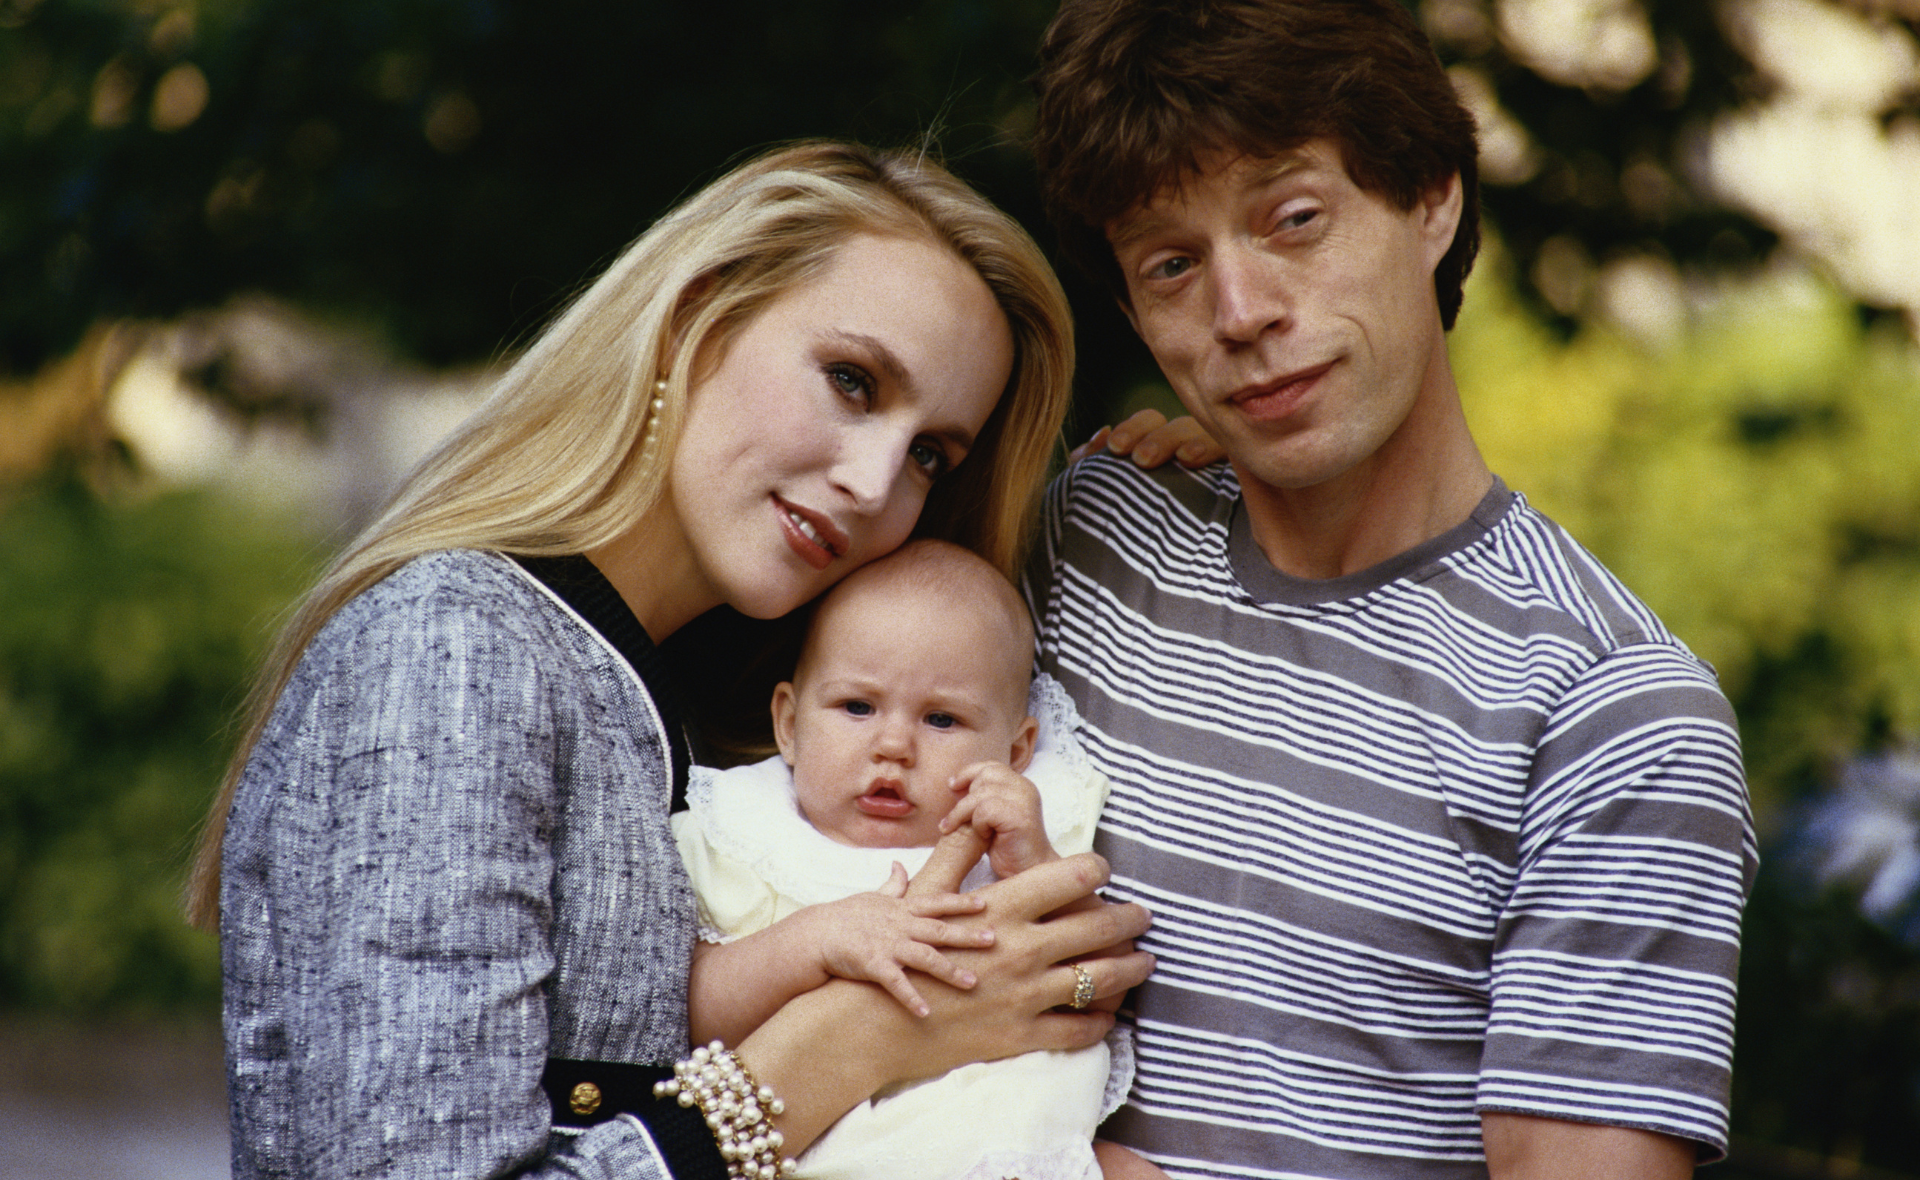 From supermodels to rockstars: We look back at Mick Jagger’s relationship history